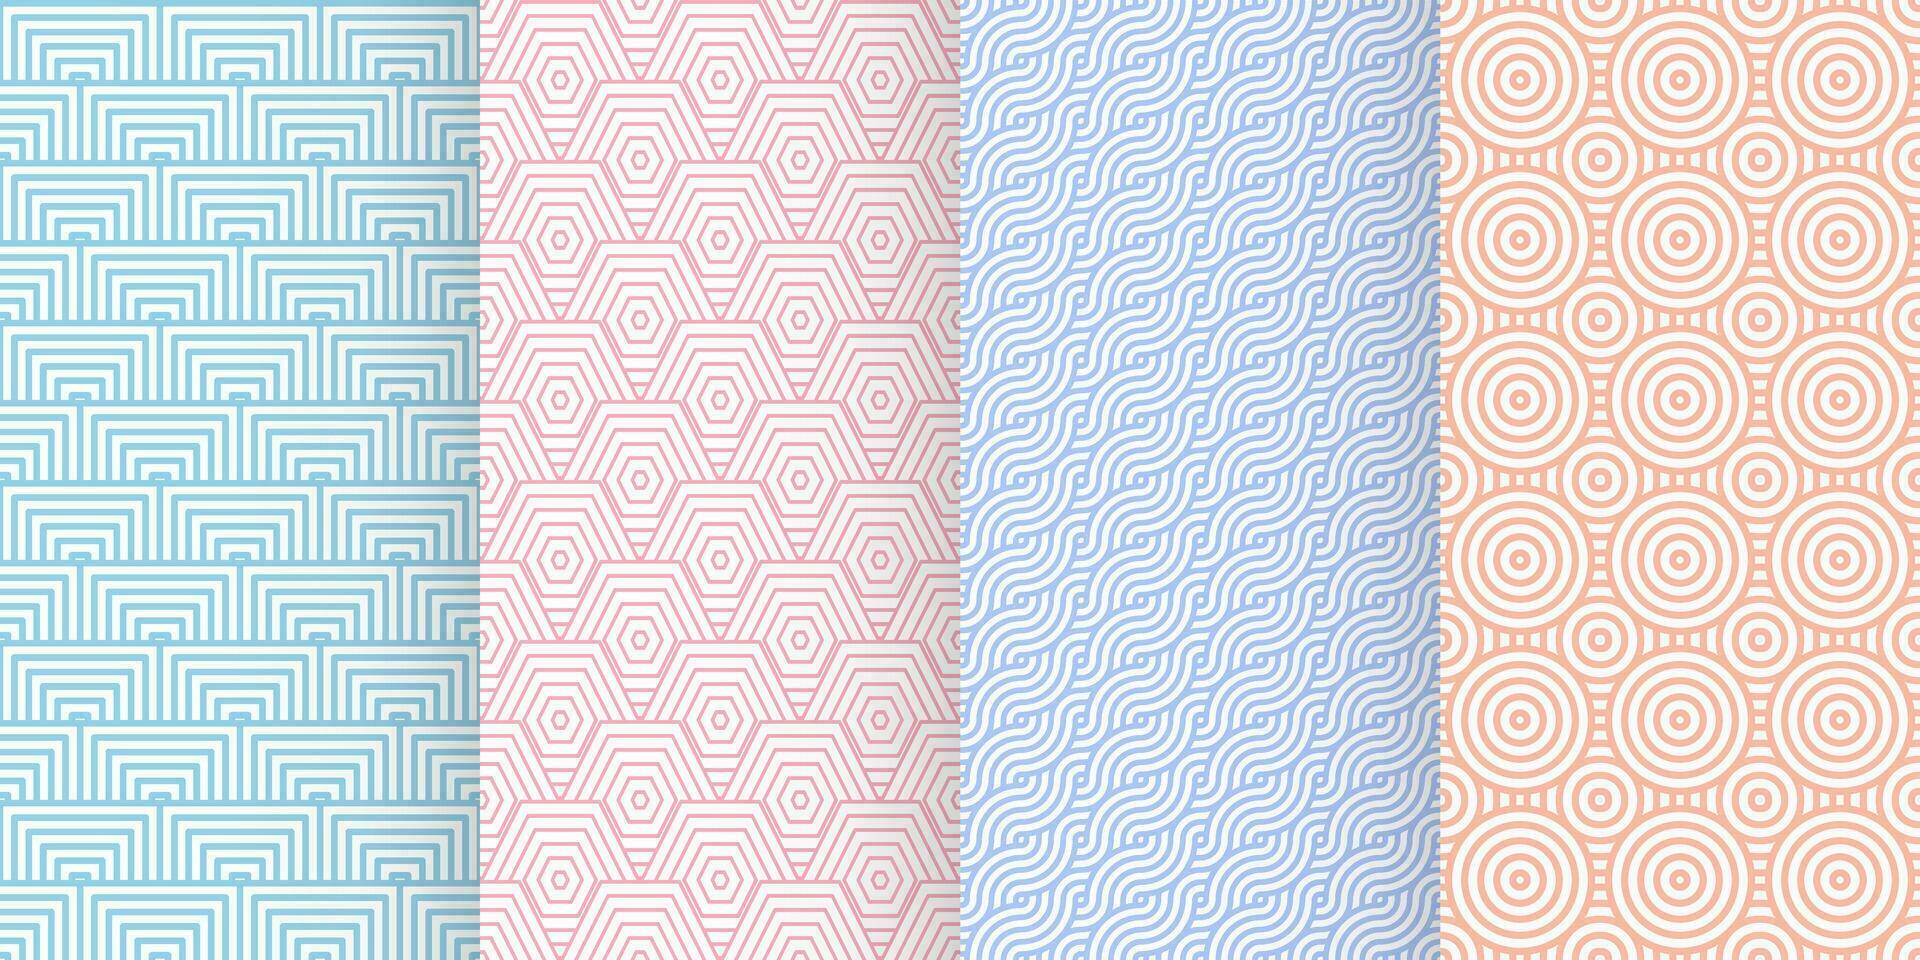 Set of geometric seamless patterns of pastel colors, abstract backgrounds for prints, textiles. Vector